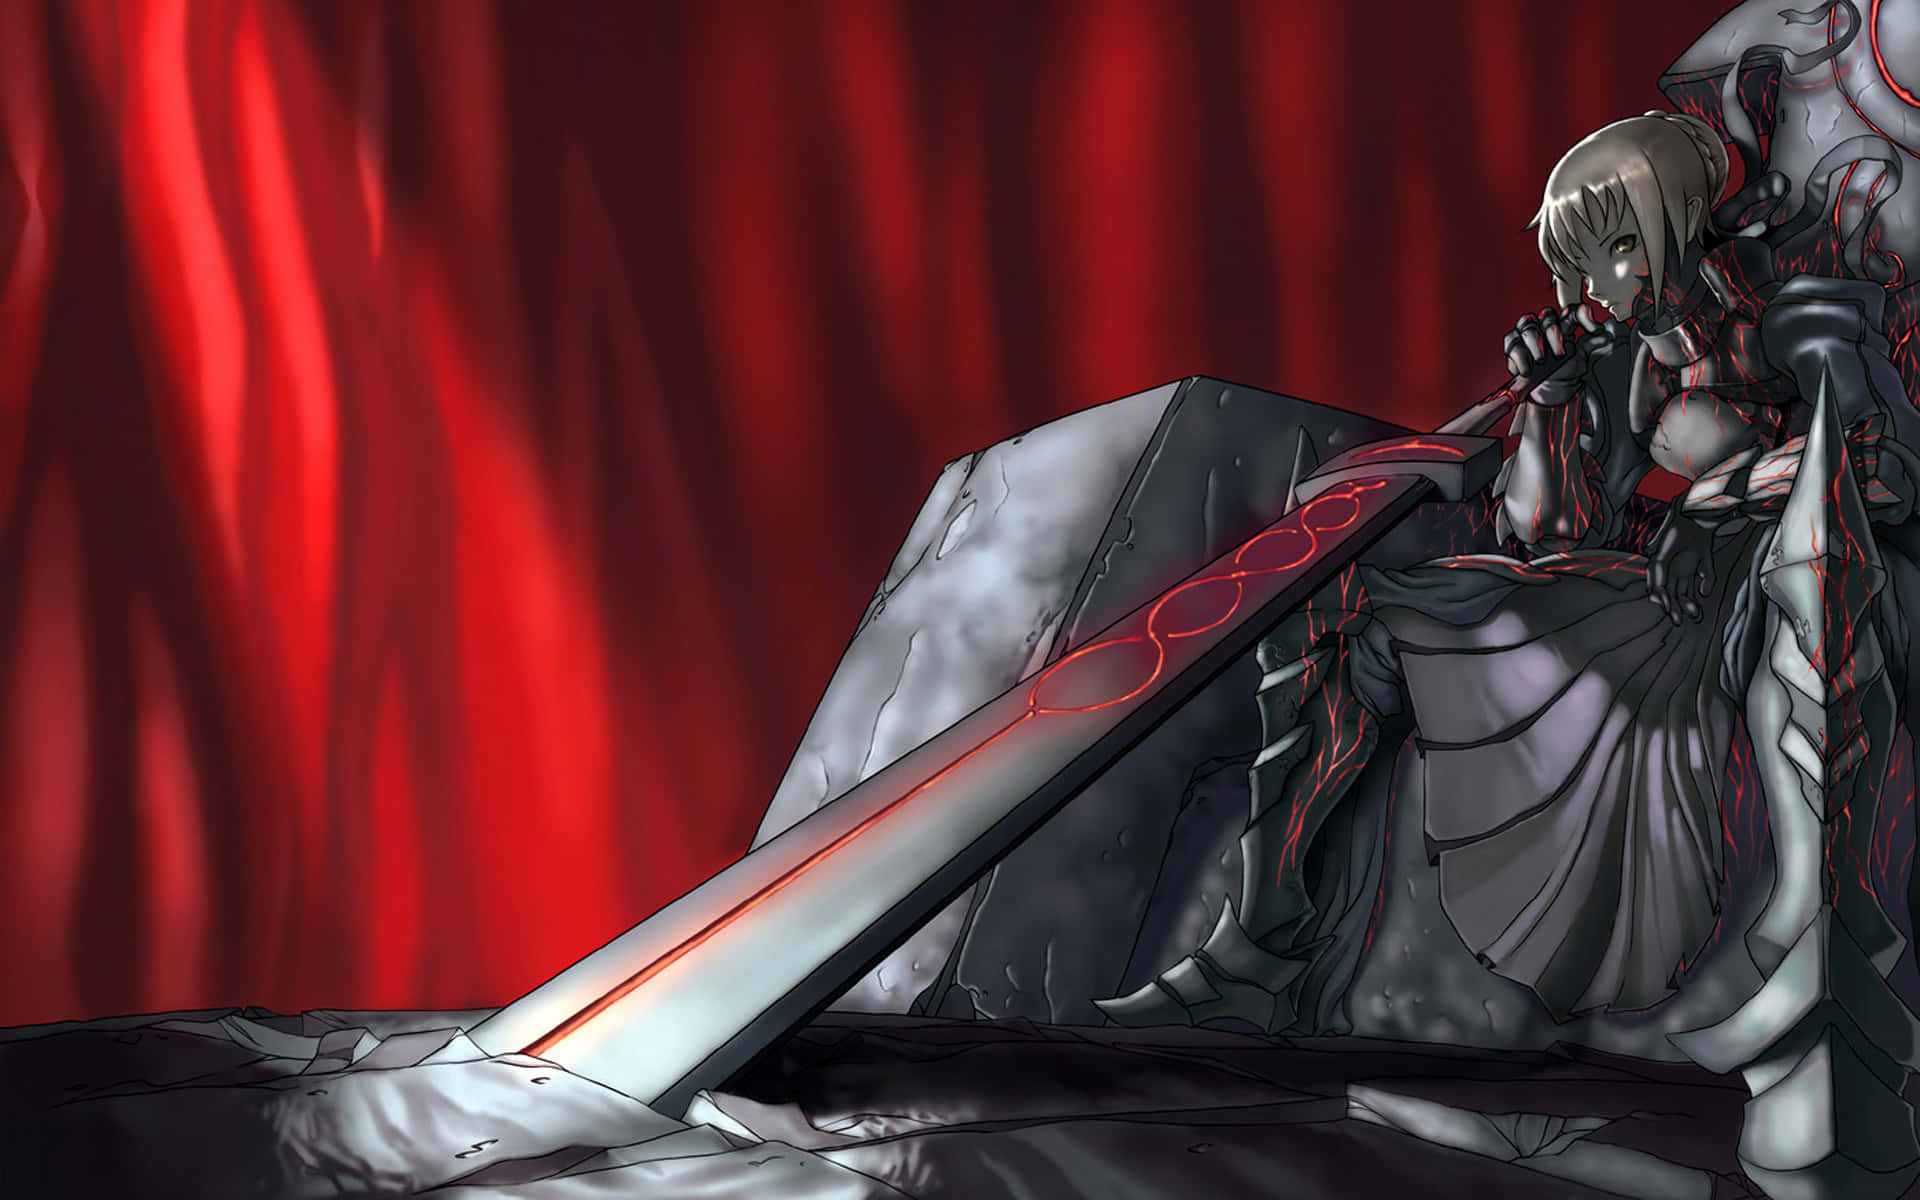 Alter Saber Fate Stay Night Throne Room Wallpaper